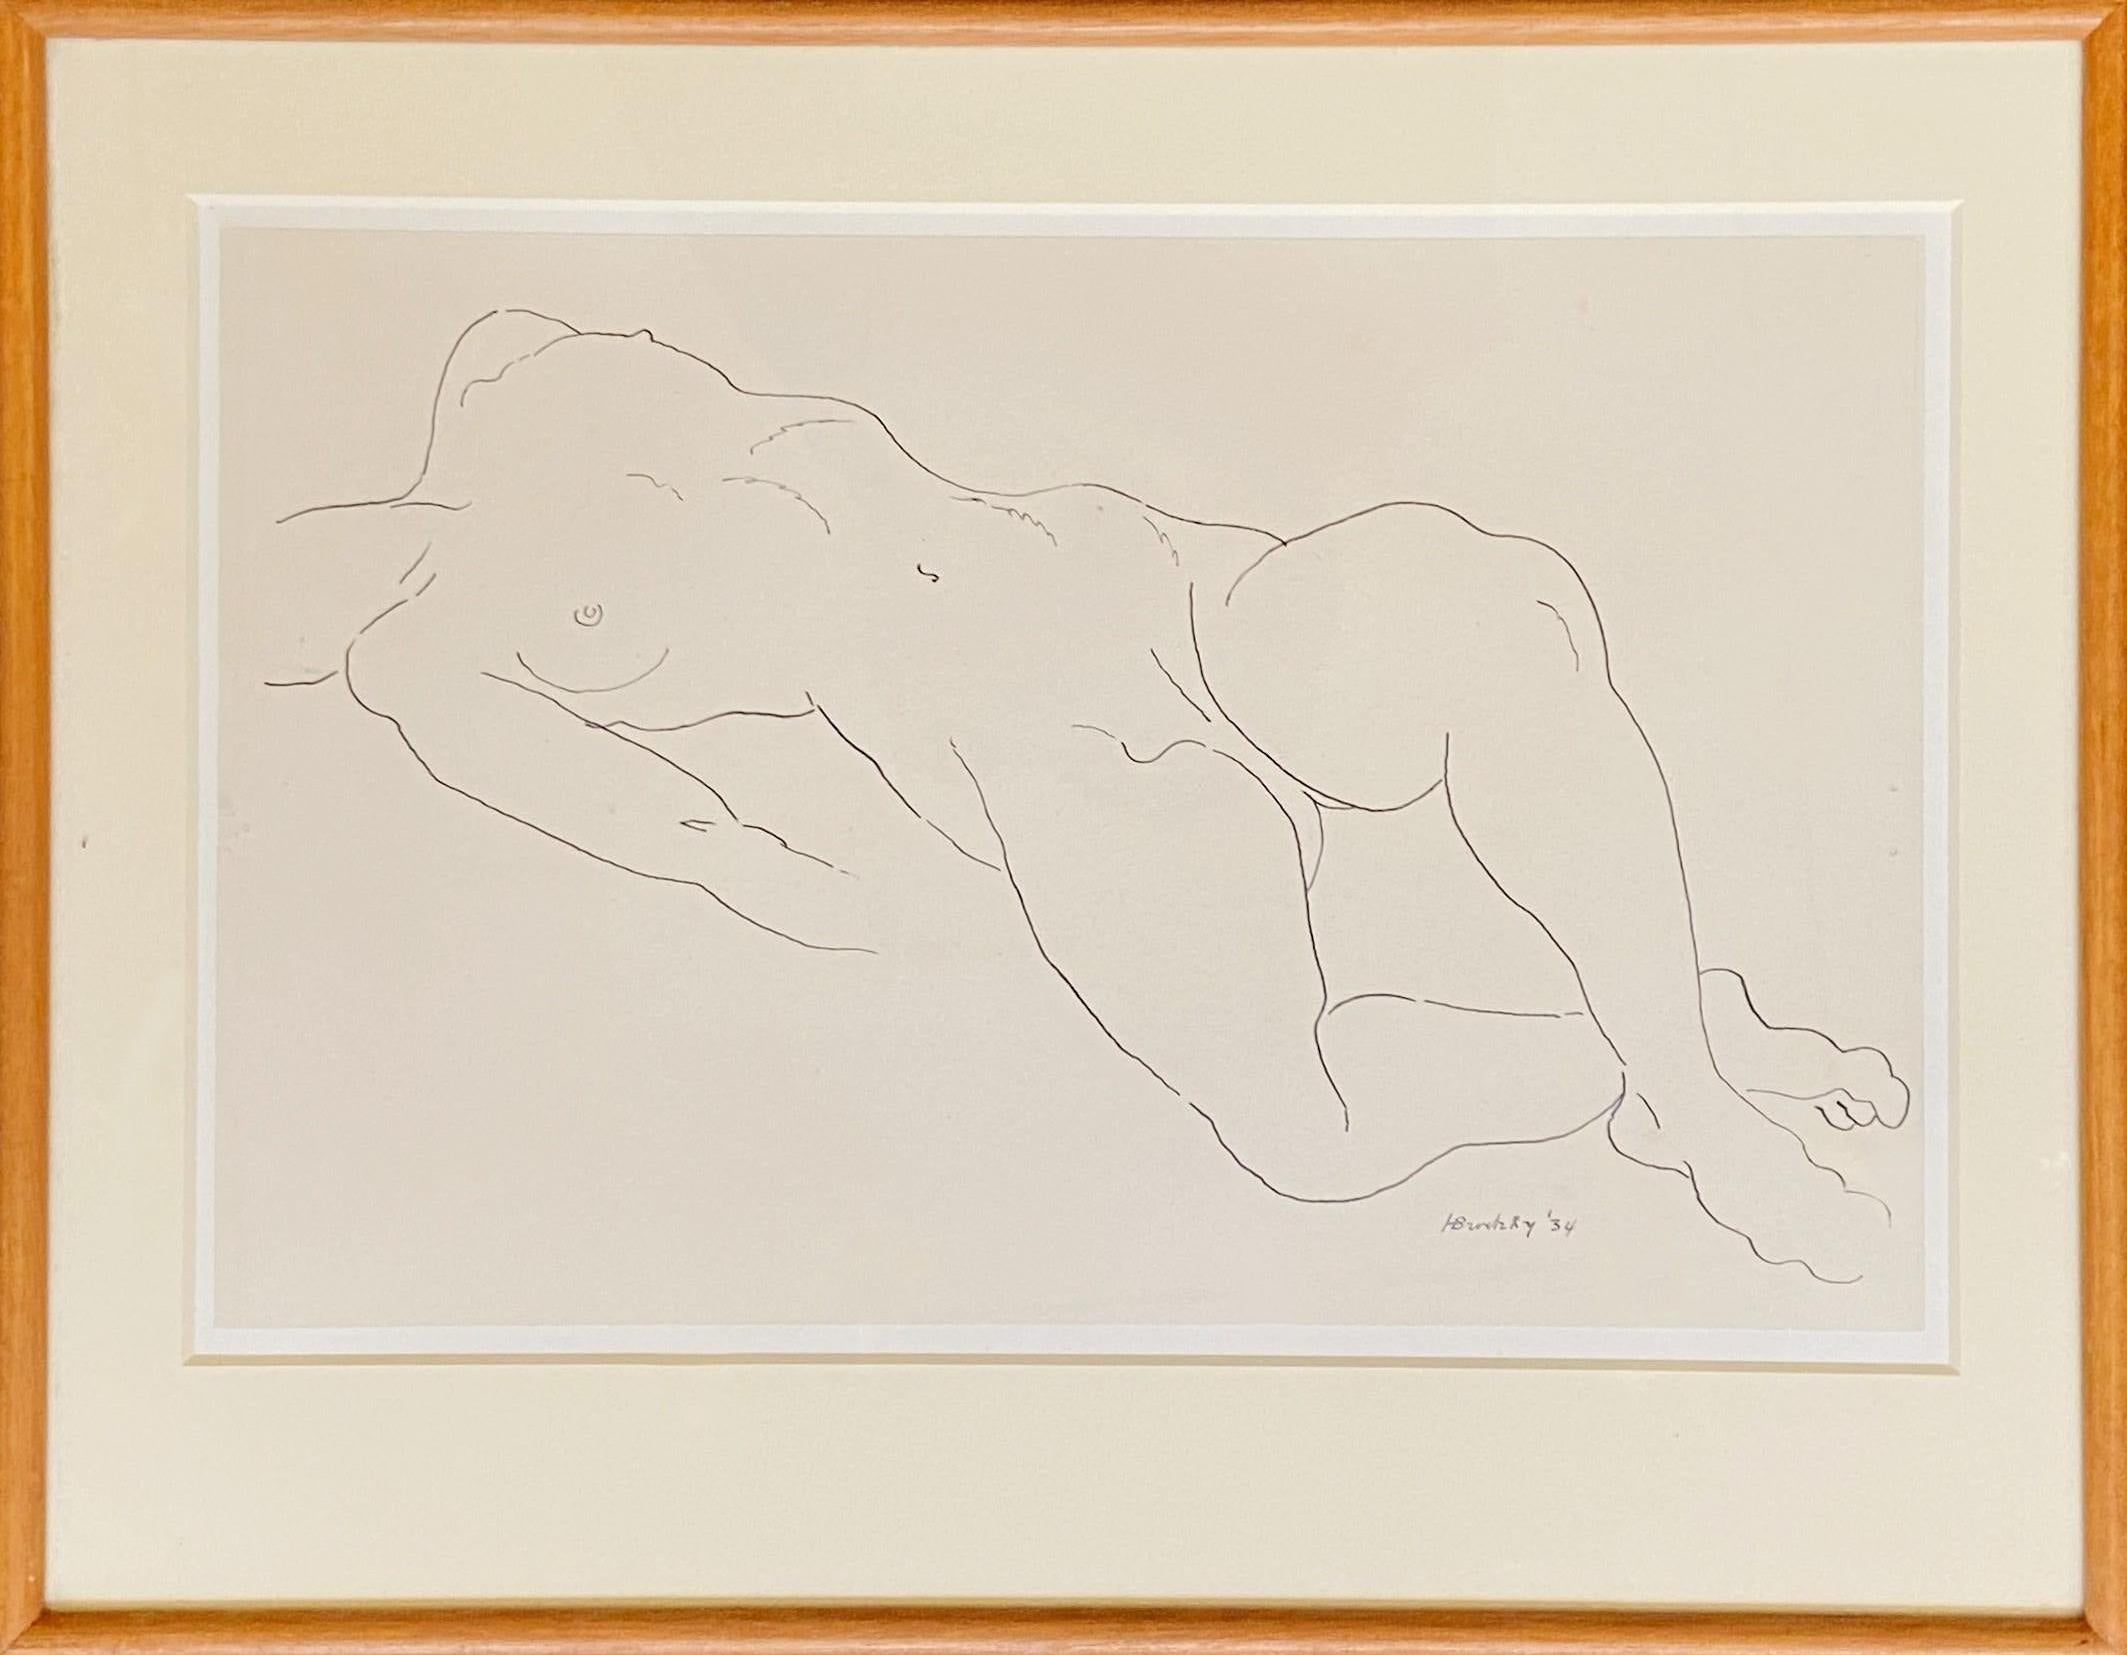 Essence of Line, Ink Nude Study, Early 20th Century Drawing, Signed and Dated - Modern Art by Horace Brodsky